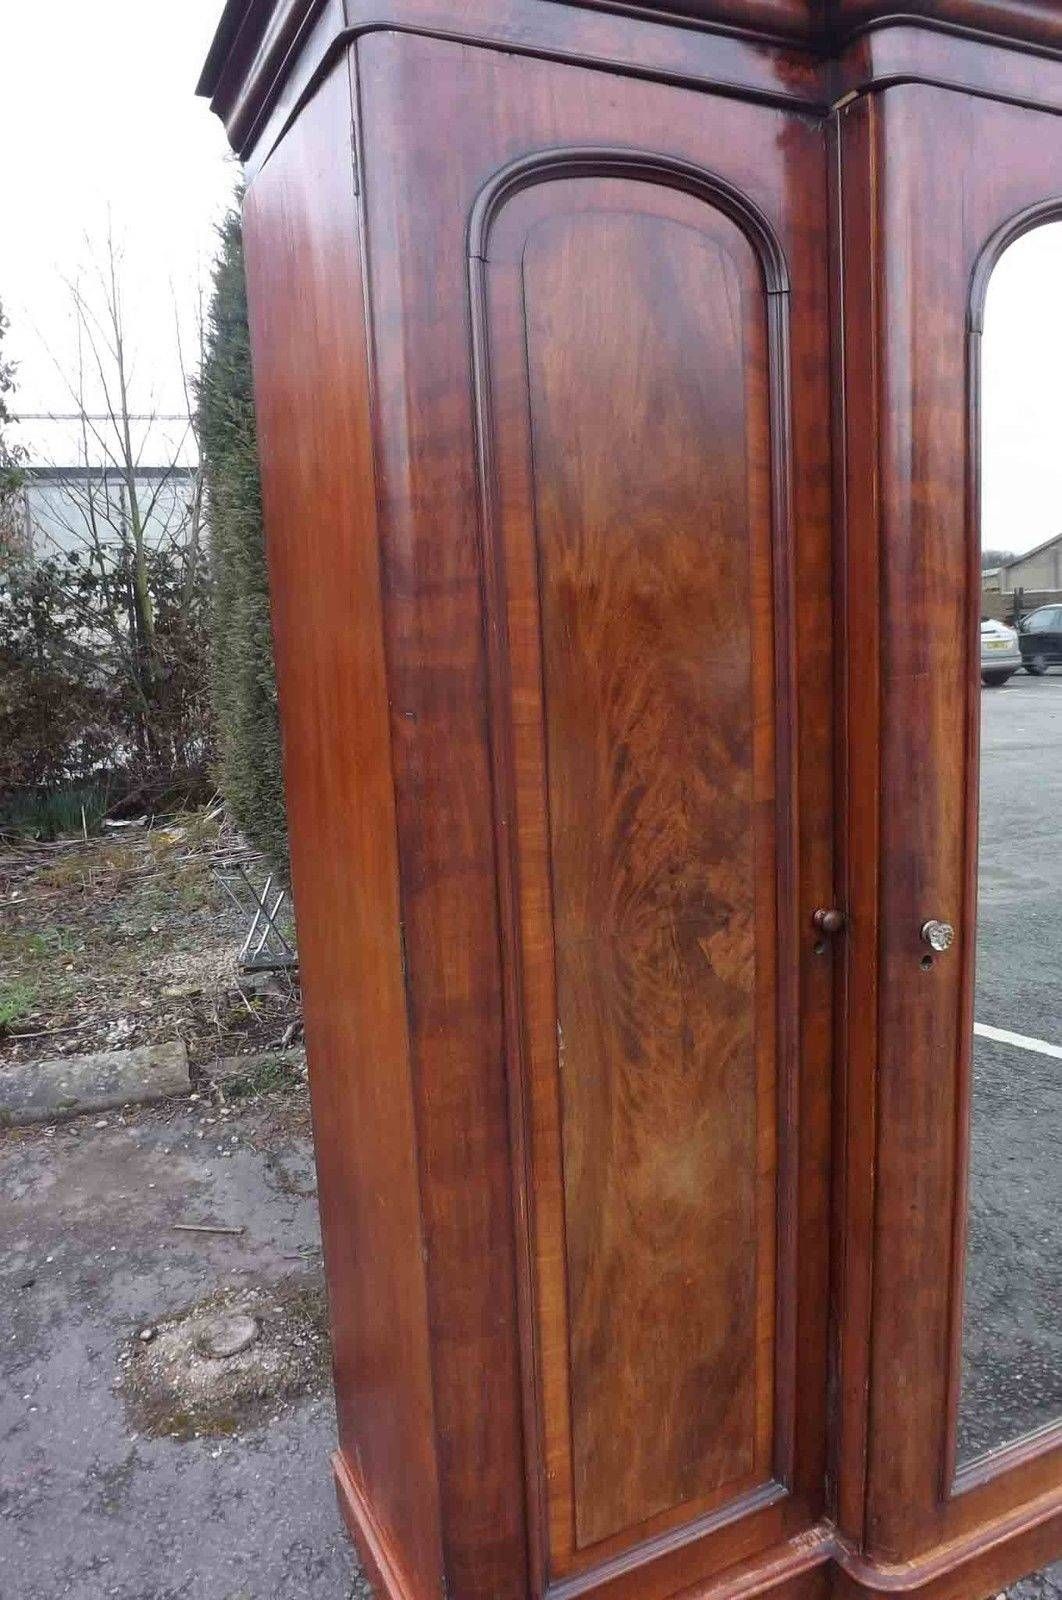 Victorian Mahogany Breakfront Wardrobe For Sale | Antiques With Regard To Victorian Wardrobes For Sale (View 9 of 15)